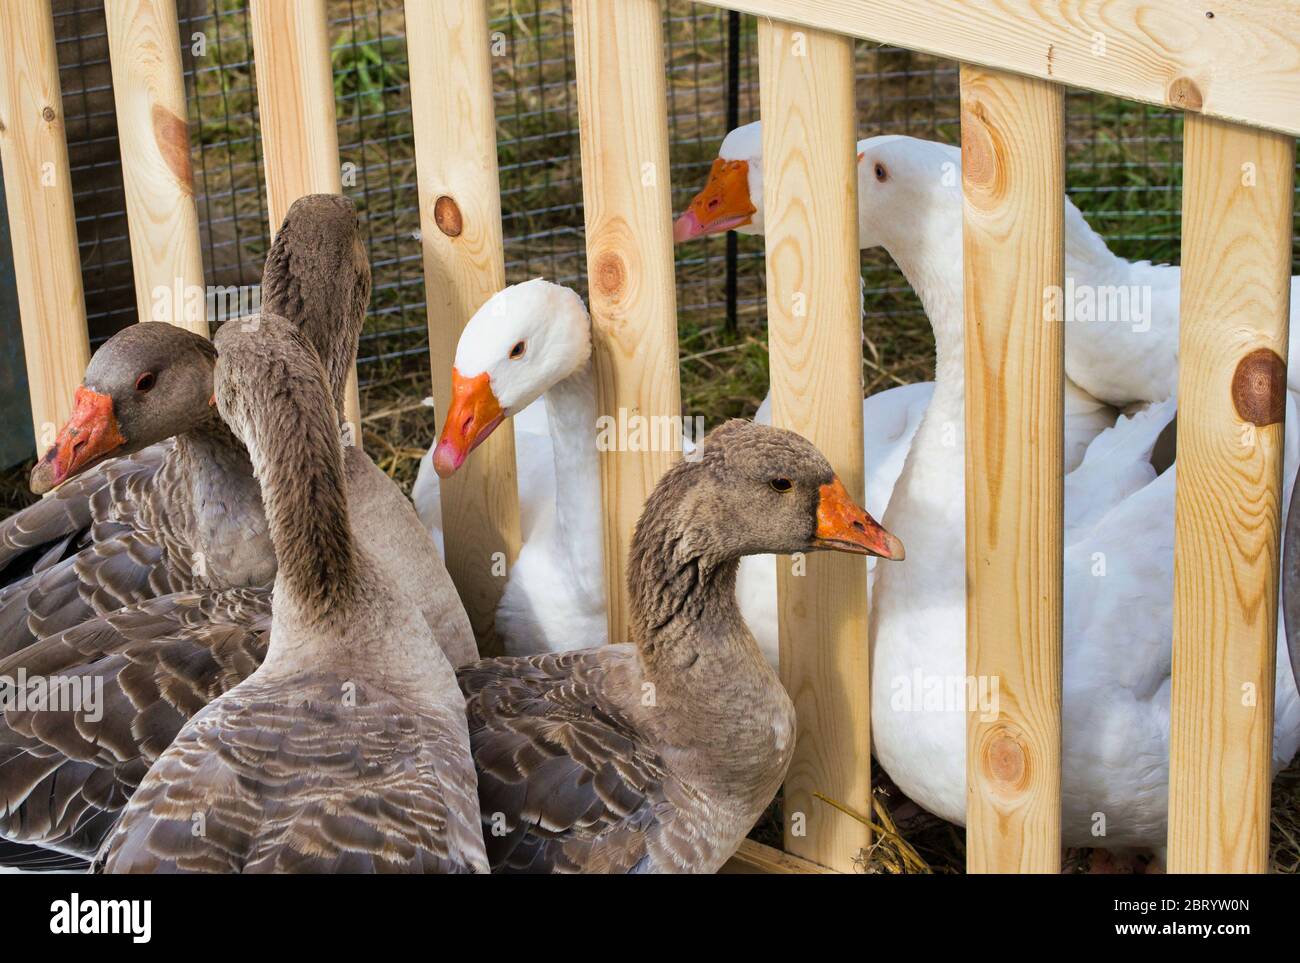 grey and white geese in an aviary with a wooden partition Stock Photo